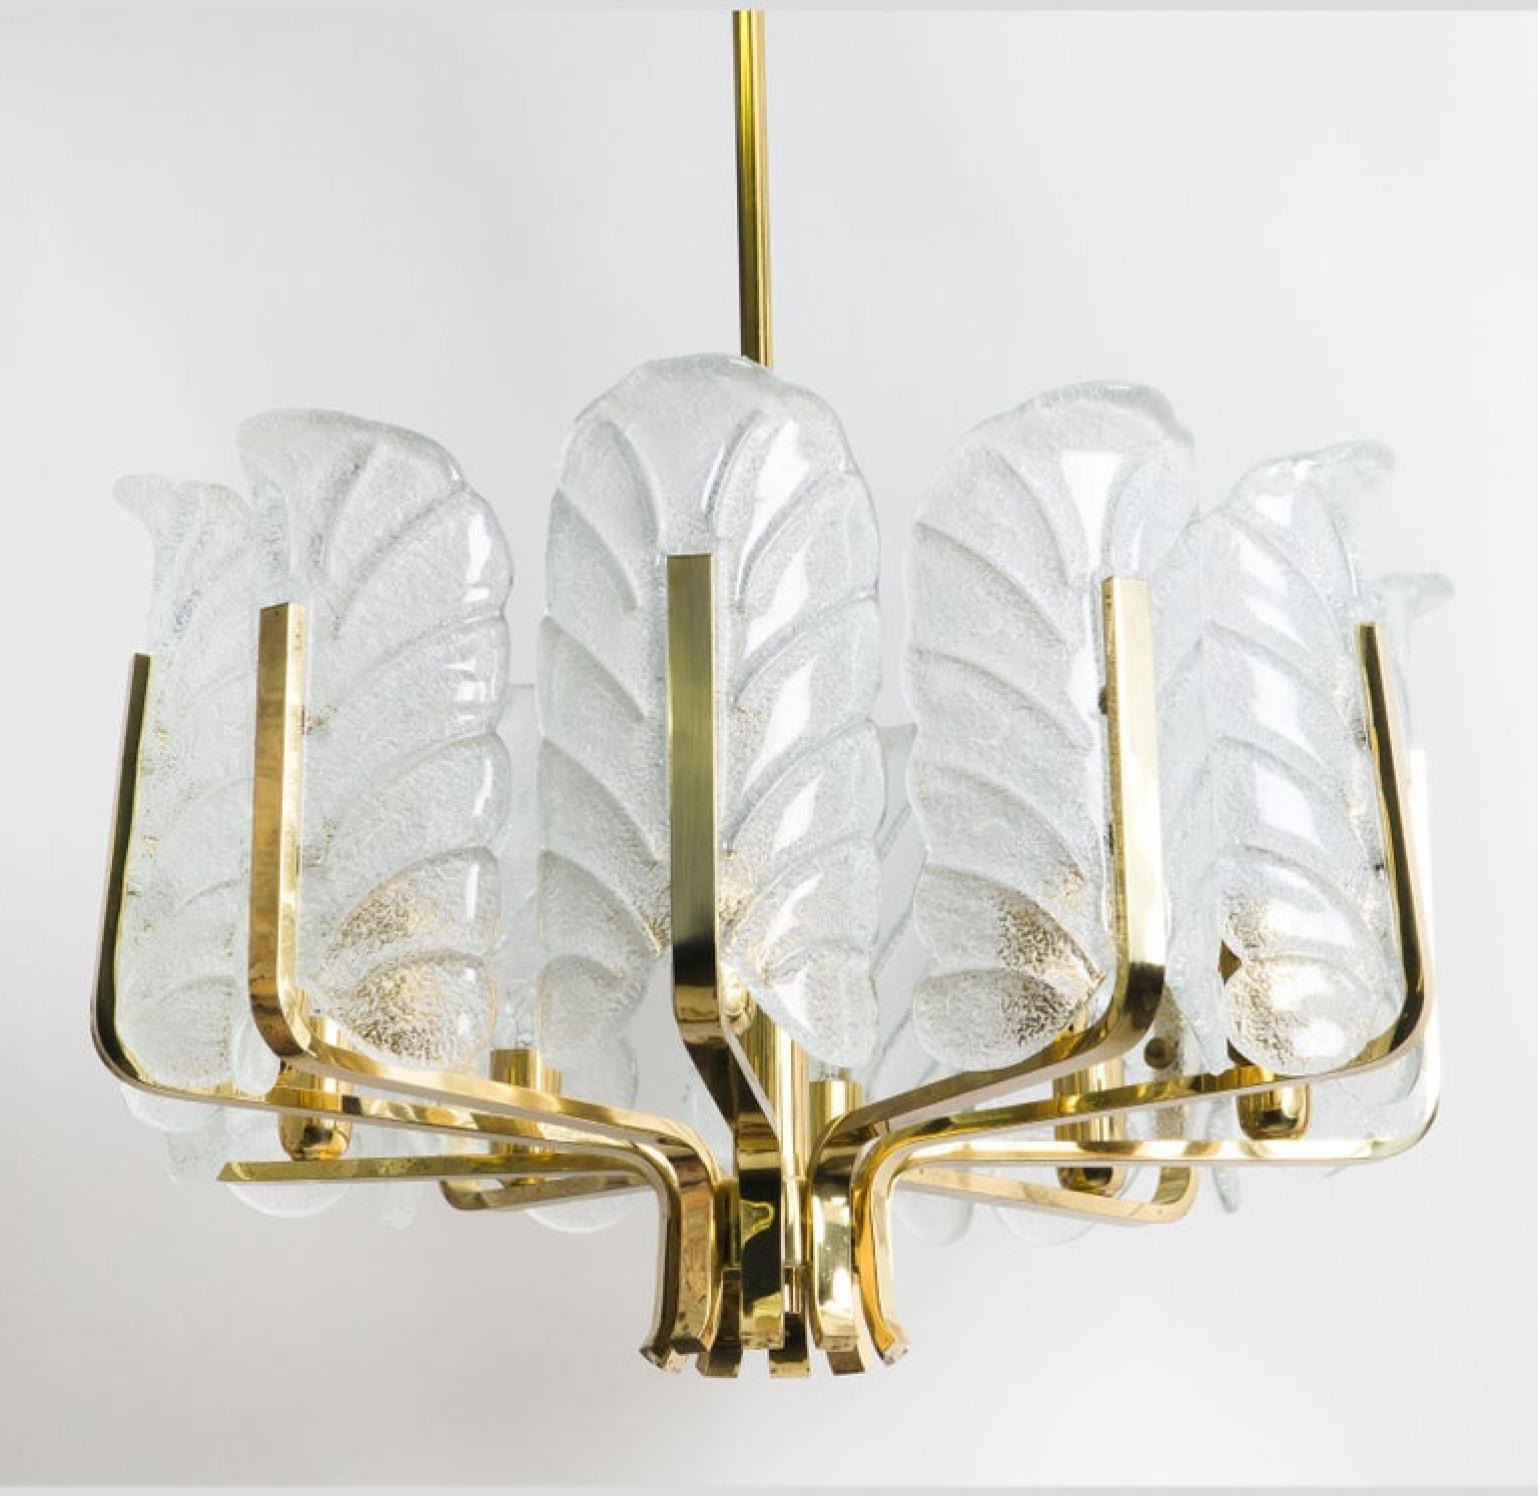 One of the Six Large Fagerlund Glass Leaves Brass Chandelier by Orrefors, 1960s For Sale 3